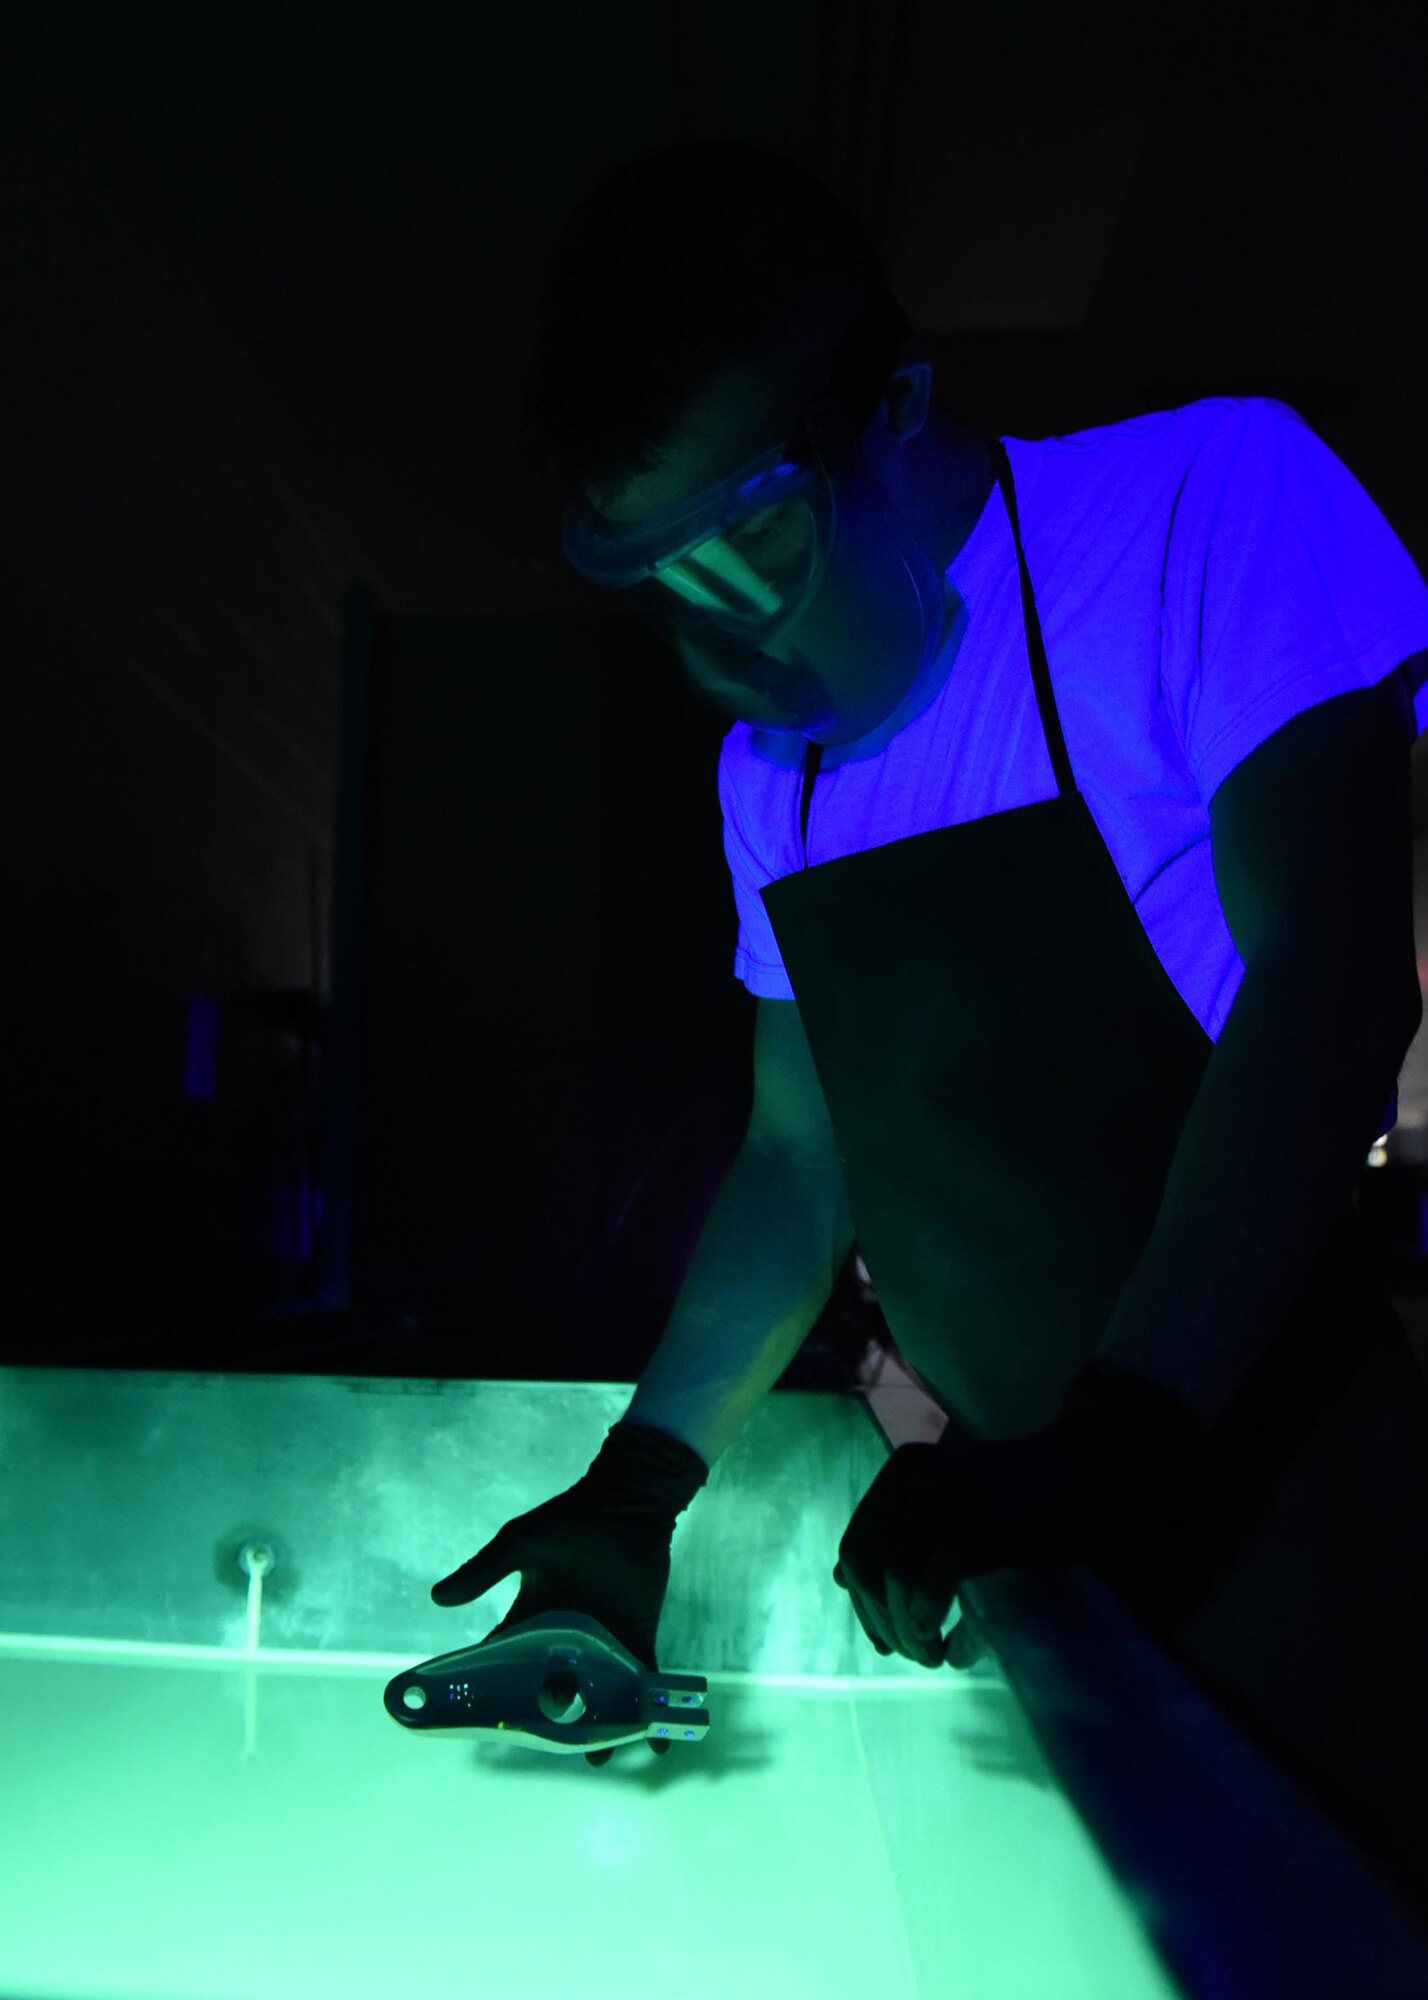 U.S. Air Force Airman 1st Class James Schwein, 19th Maintenance Squadron nondestructive inspections journeyman, submerges a C-130J tow fitting arm into liquid fluorescent penetrant Jan. 31, 2017, at Little Rock Air Force Base, Ark. The penetrant seeps into tiny openings in the part to identify potential cracks. (U.S. Air Force photo by Airman 1st Class Kevin Sommer Giron)